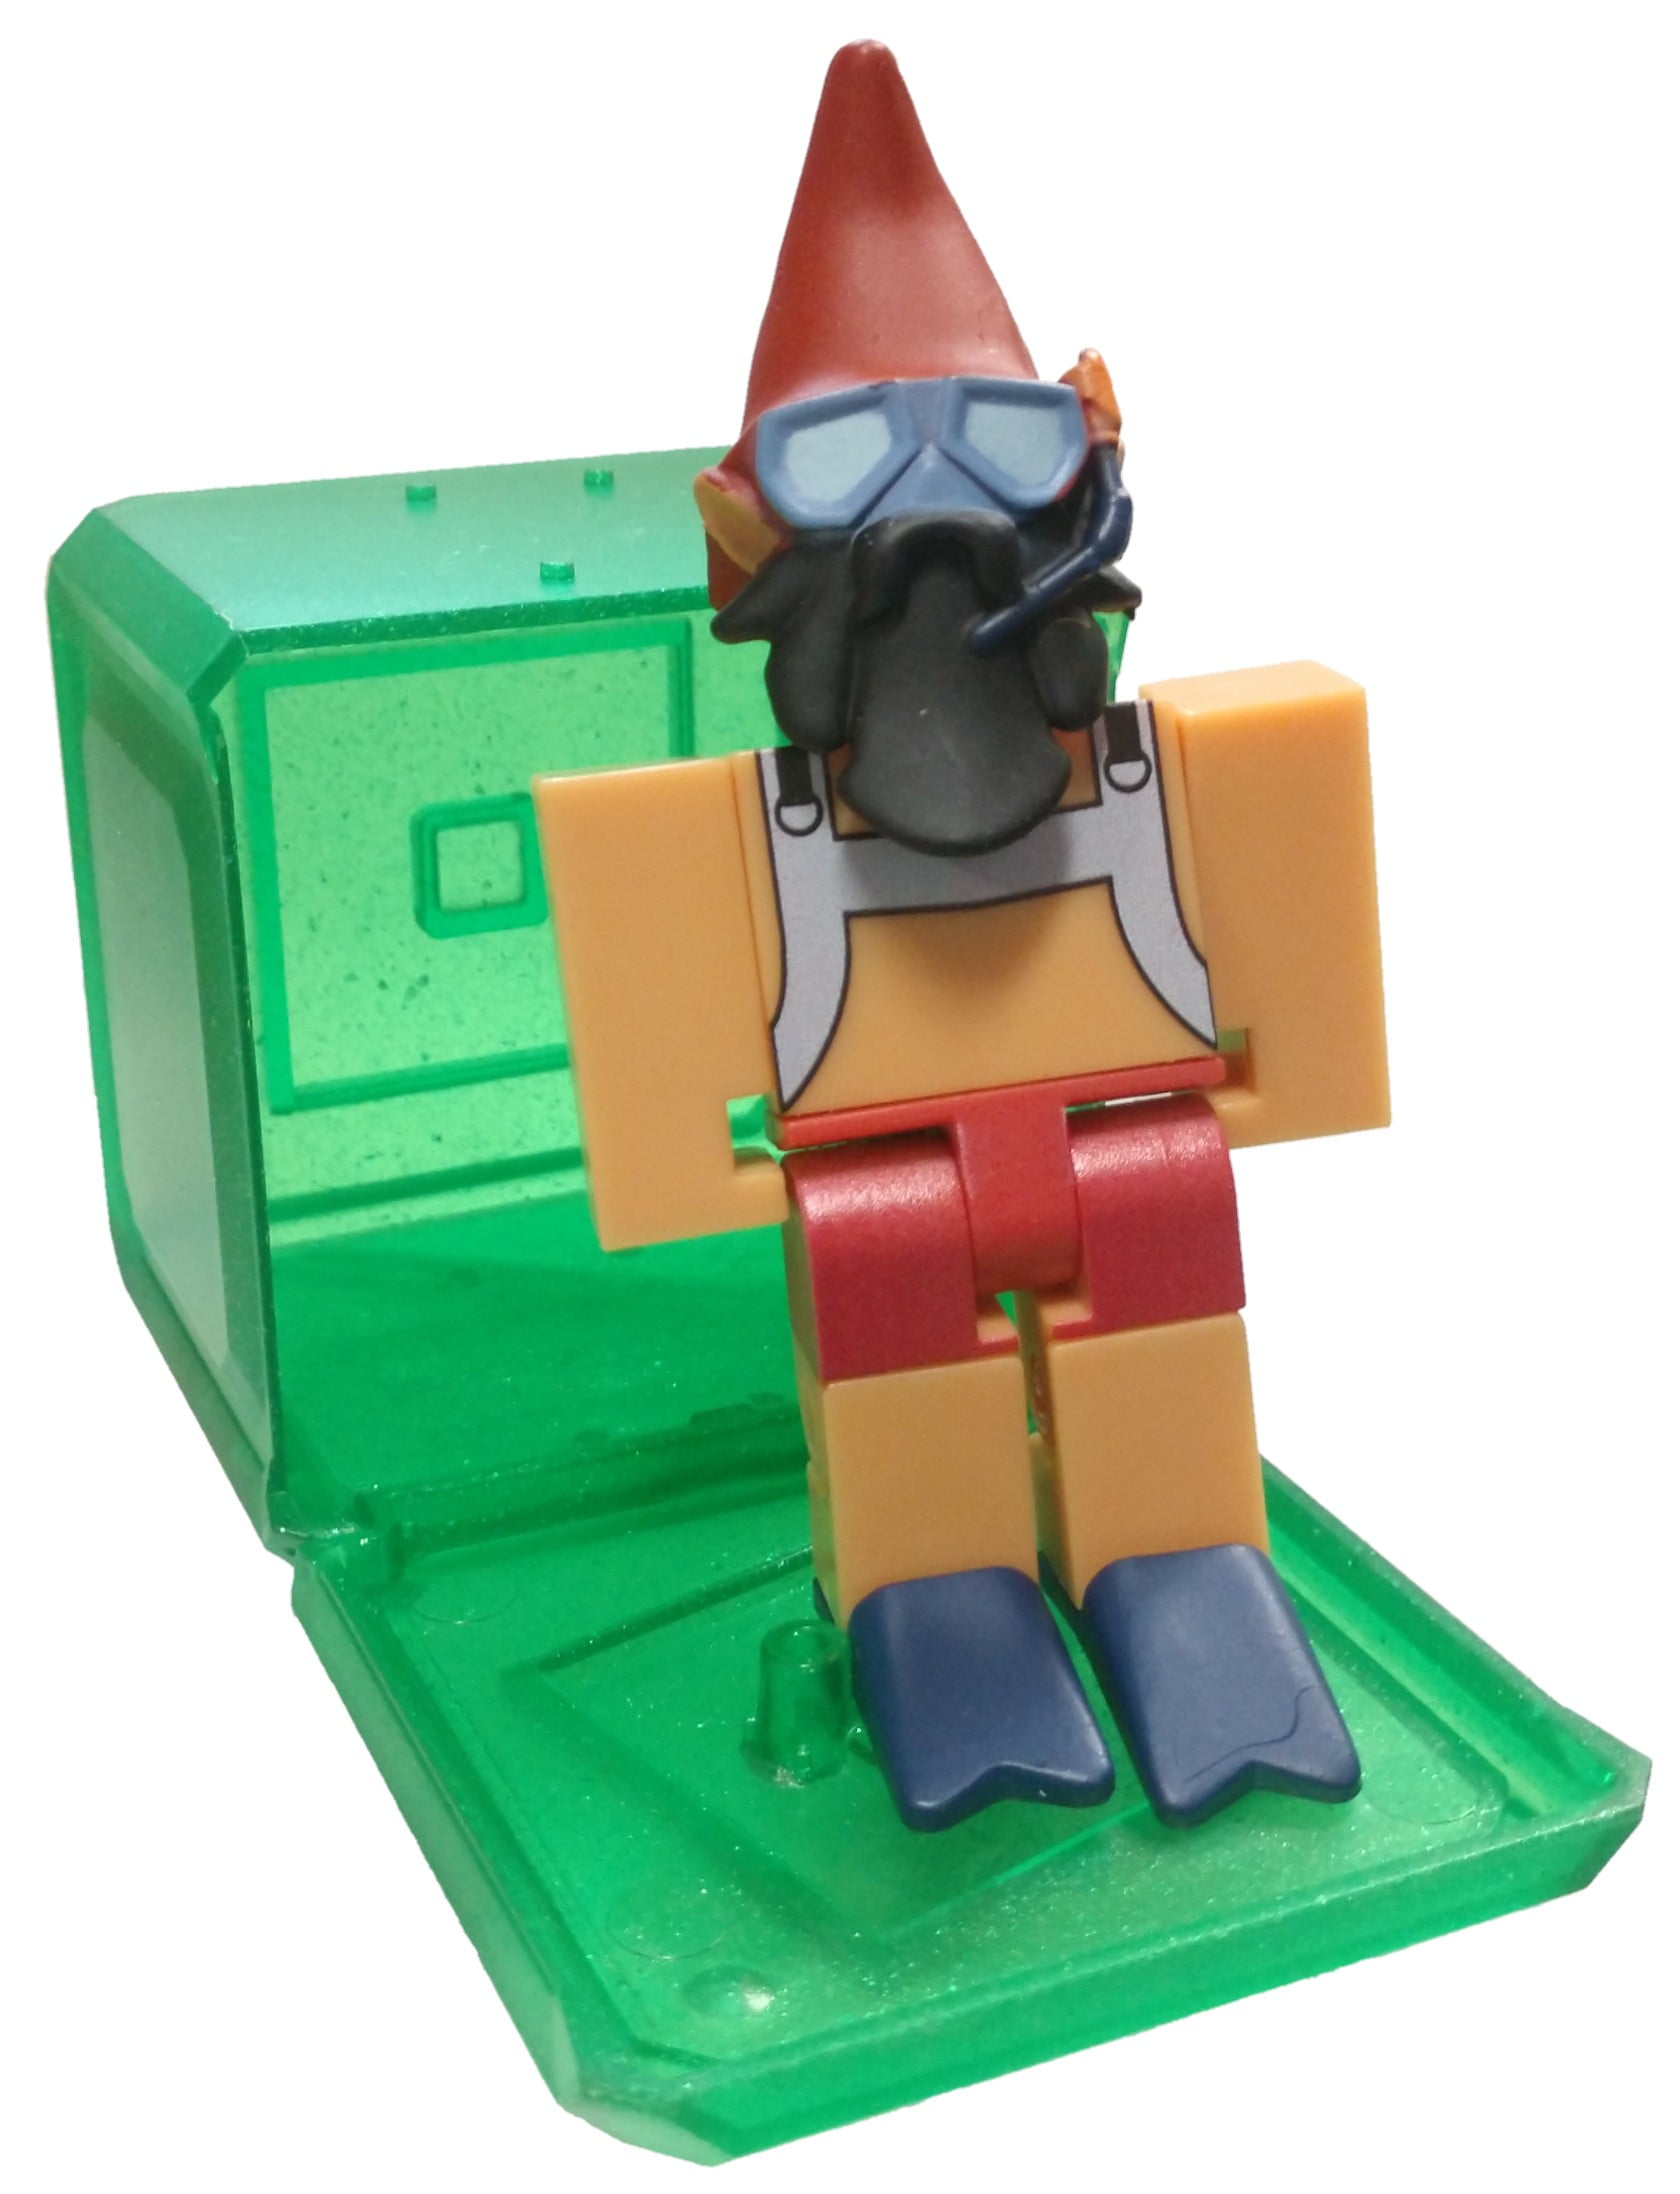 Roblox Celebrity Collection Series 4 Gardening Simulator Georgil Mini Figure With Green Cube And Online Code No Packaging Walmart Com Walmart Com - singing simulator not roblox